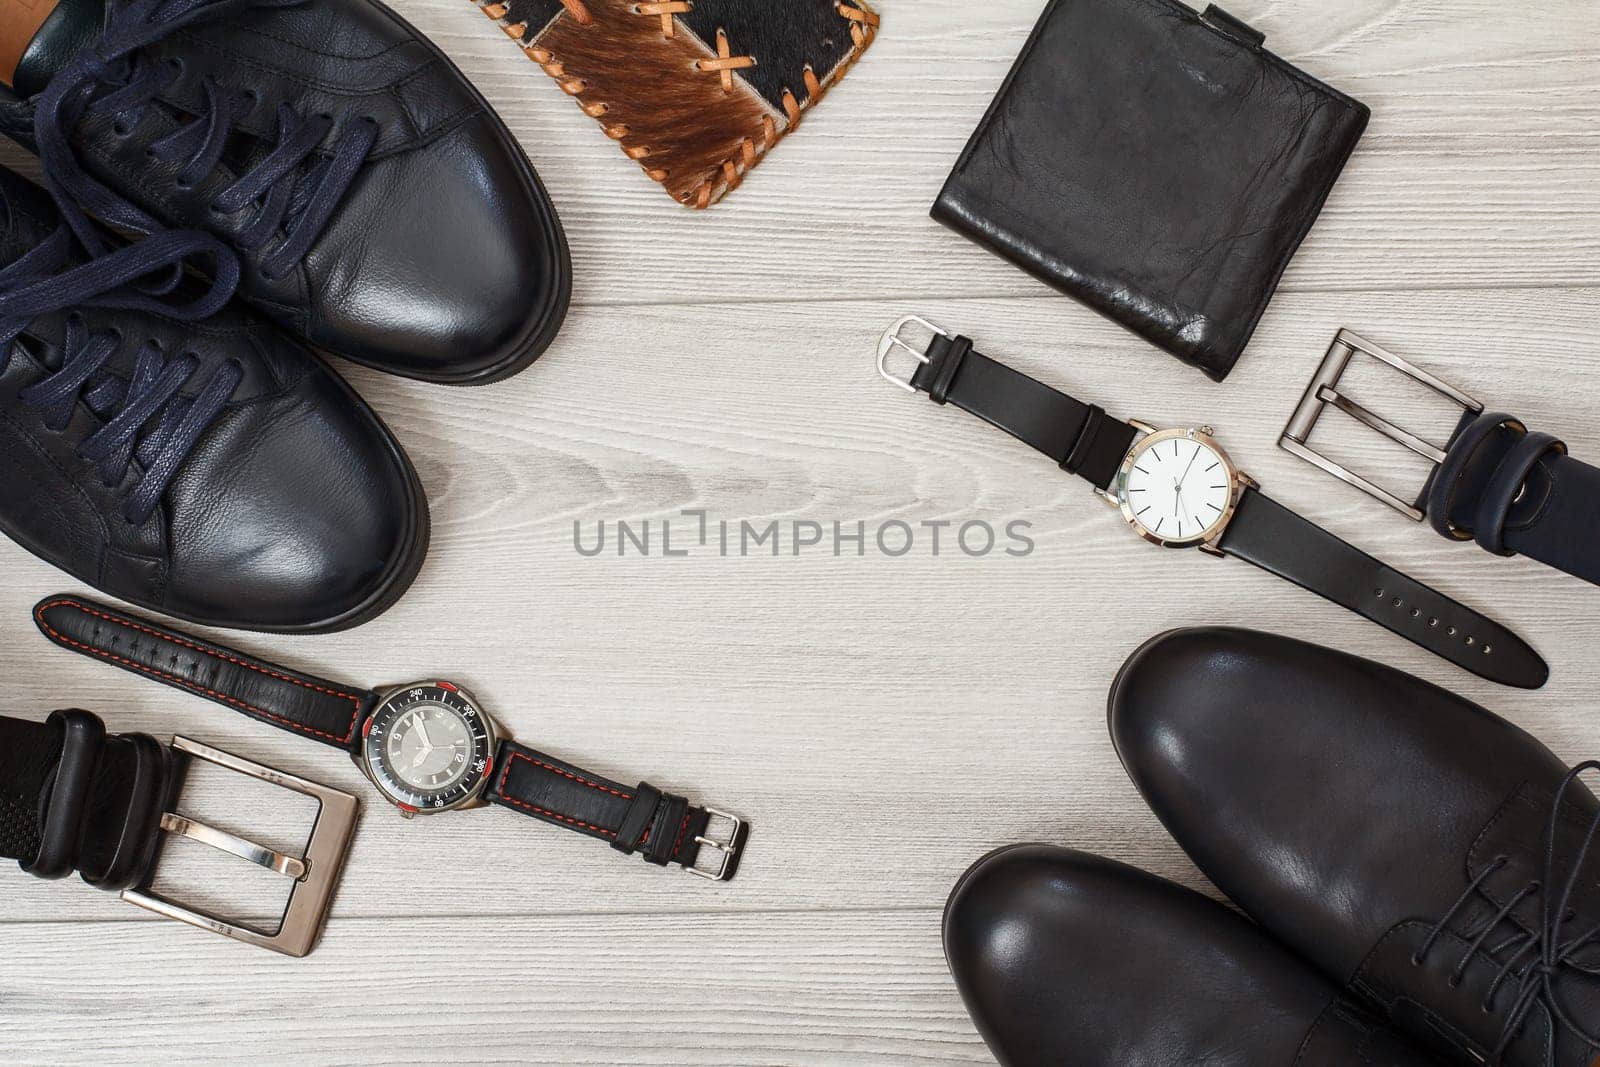 Two pairs of black leather men's shoes, two belts for men, wallets and wristwatches on gray wooden background. Men's accessories. Top view.